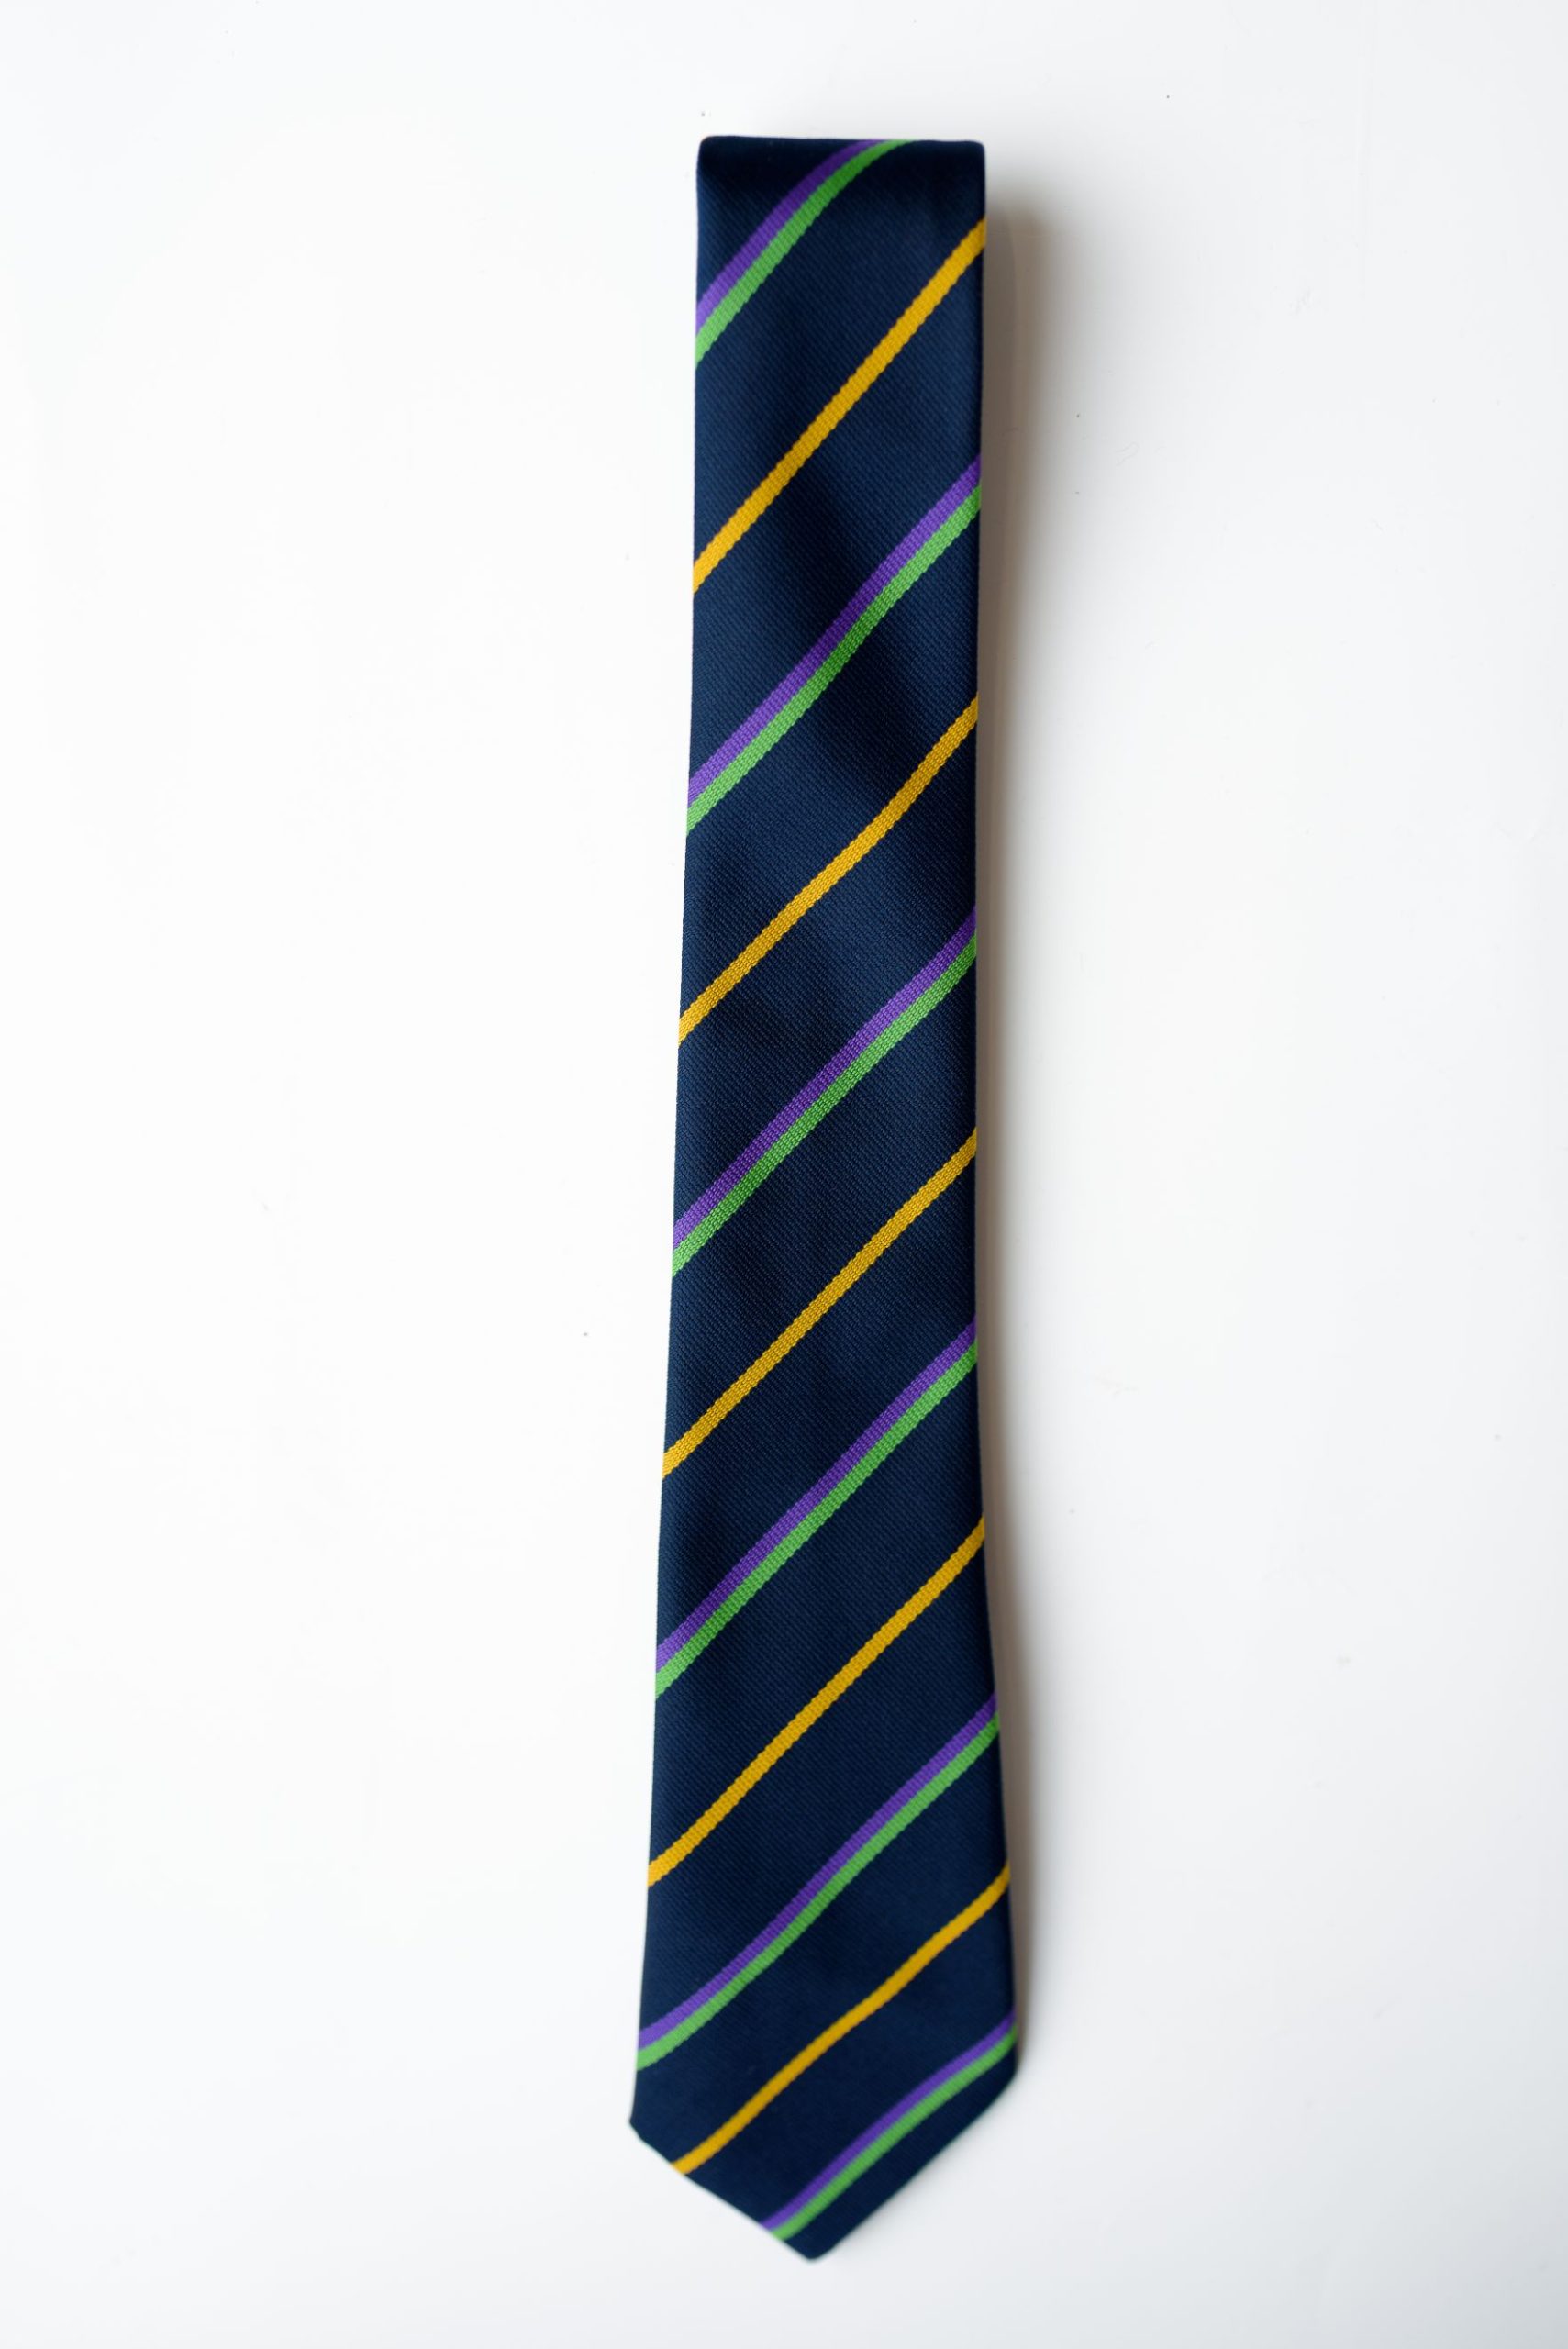 Shimna Integrated College Year 8-12 tie